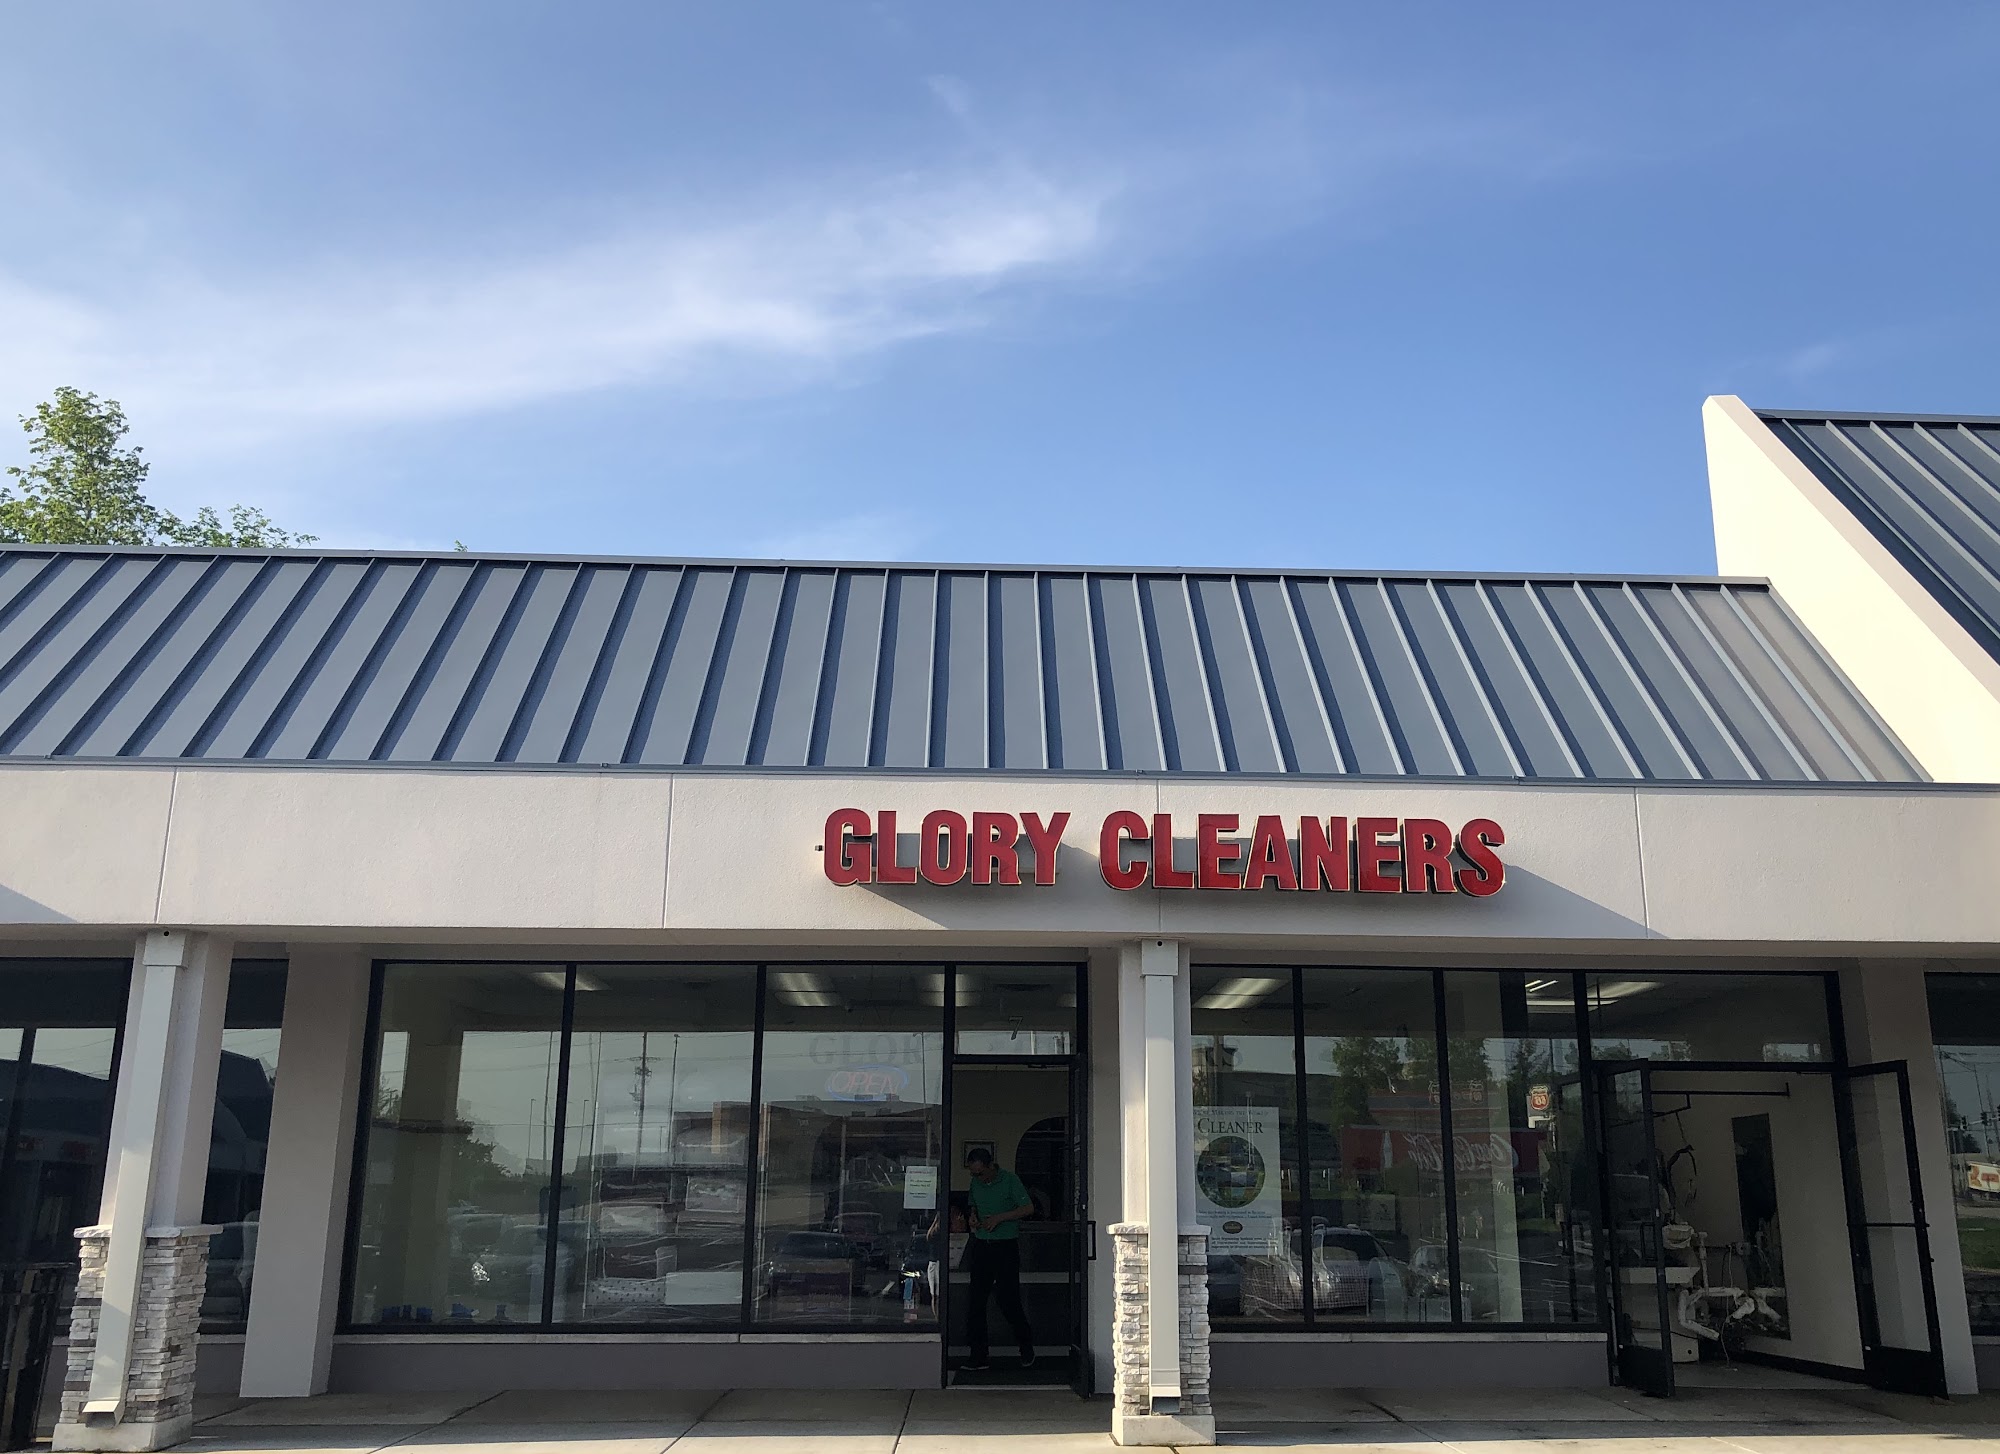 Glory Cleaners 7 Stonegate Center, Valley Park Missouri 63088